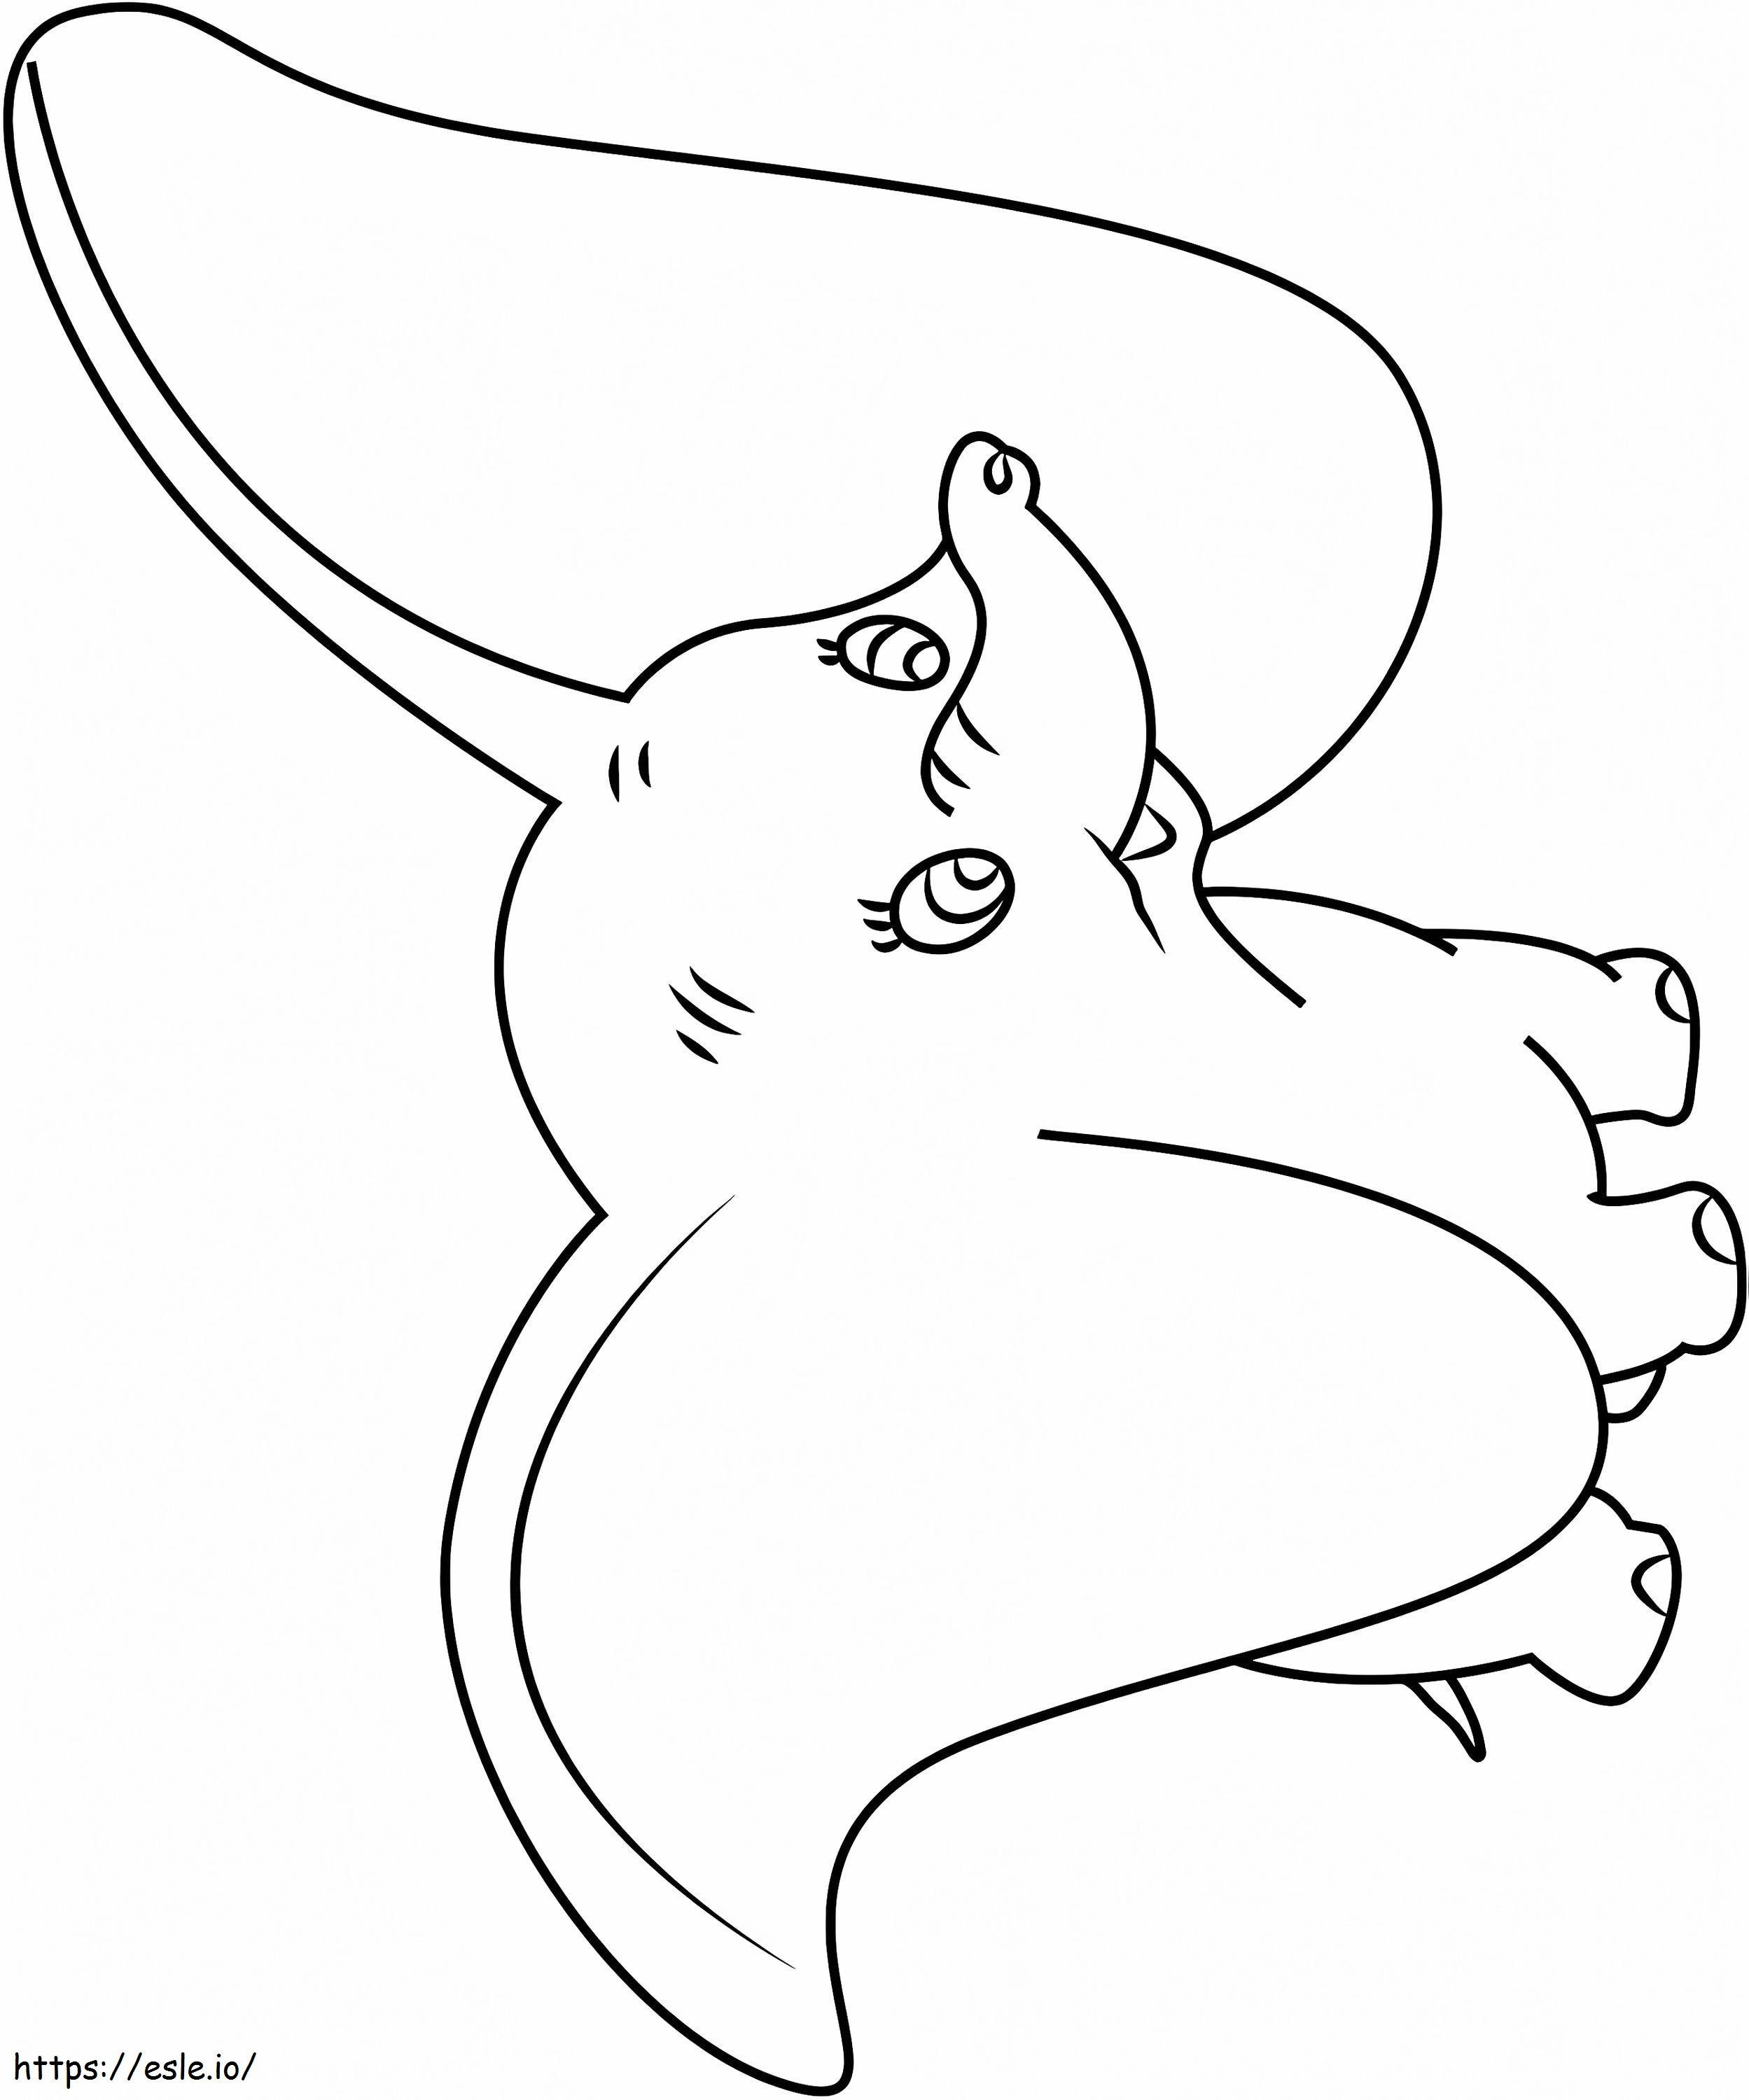 1530931013 Big Ear Of Dumbo A4 coloring page